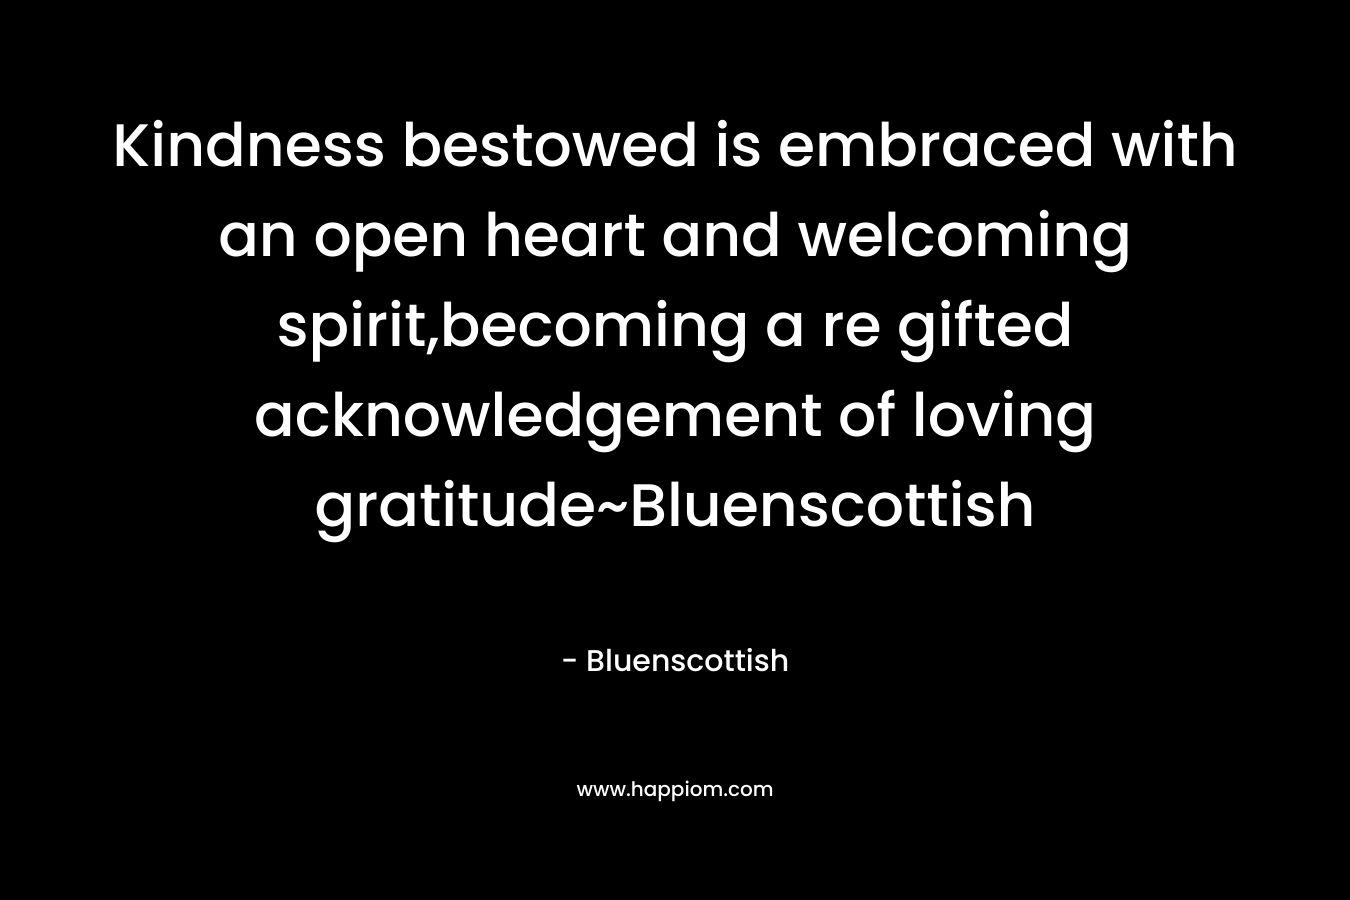 Kindness bestowed is embraced with an open heart and welcoming spirit,becoming a re gifted acknowledgement of loving gratitude~Bluenscottish – Bluenscottish